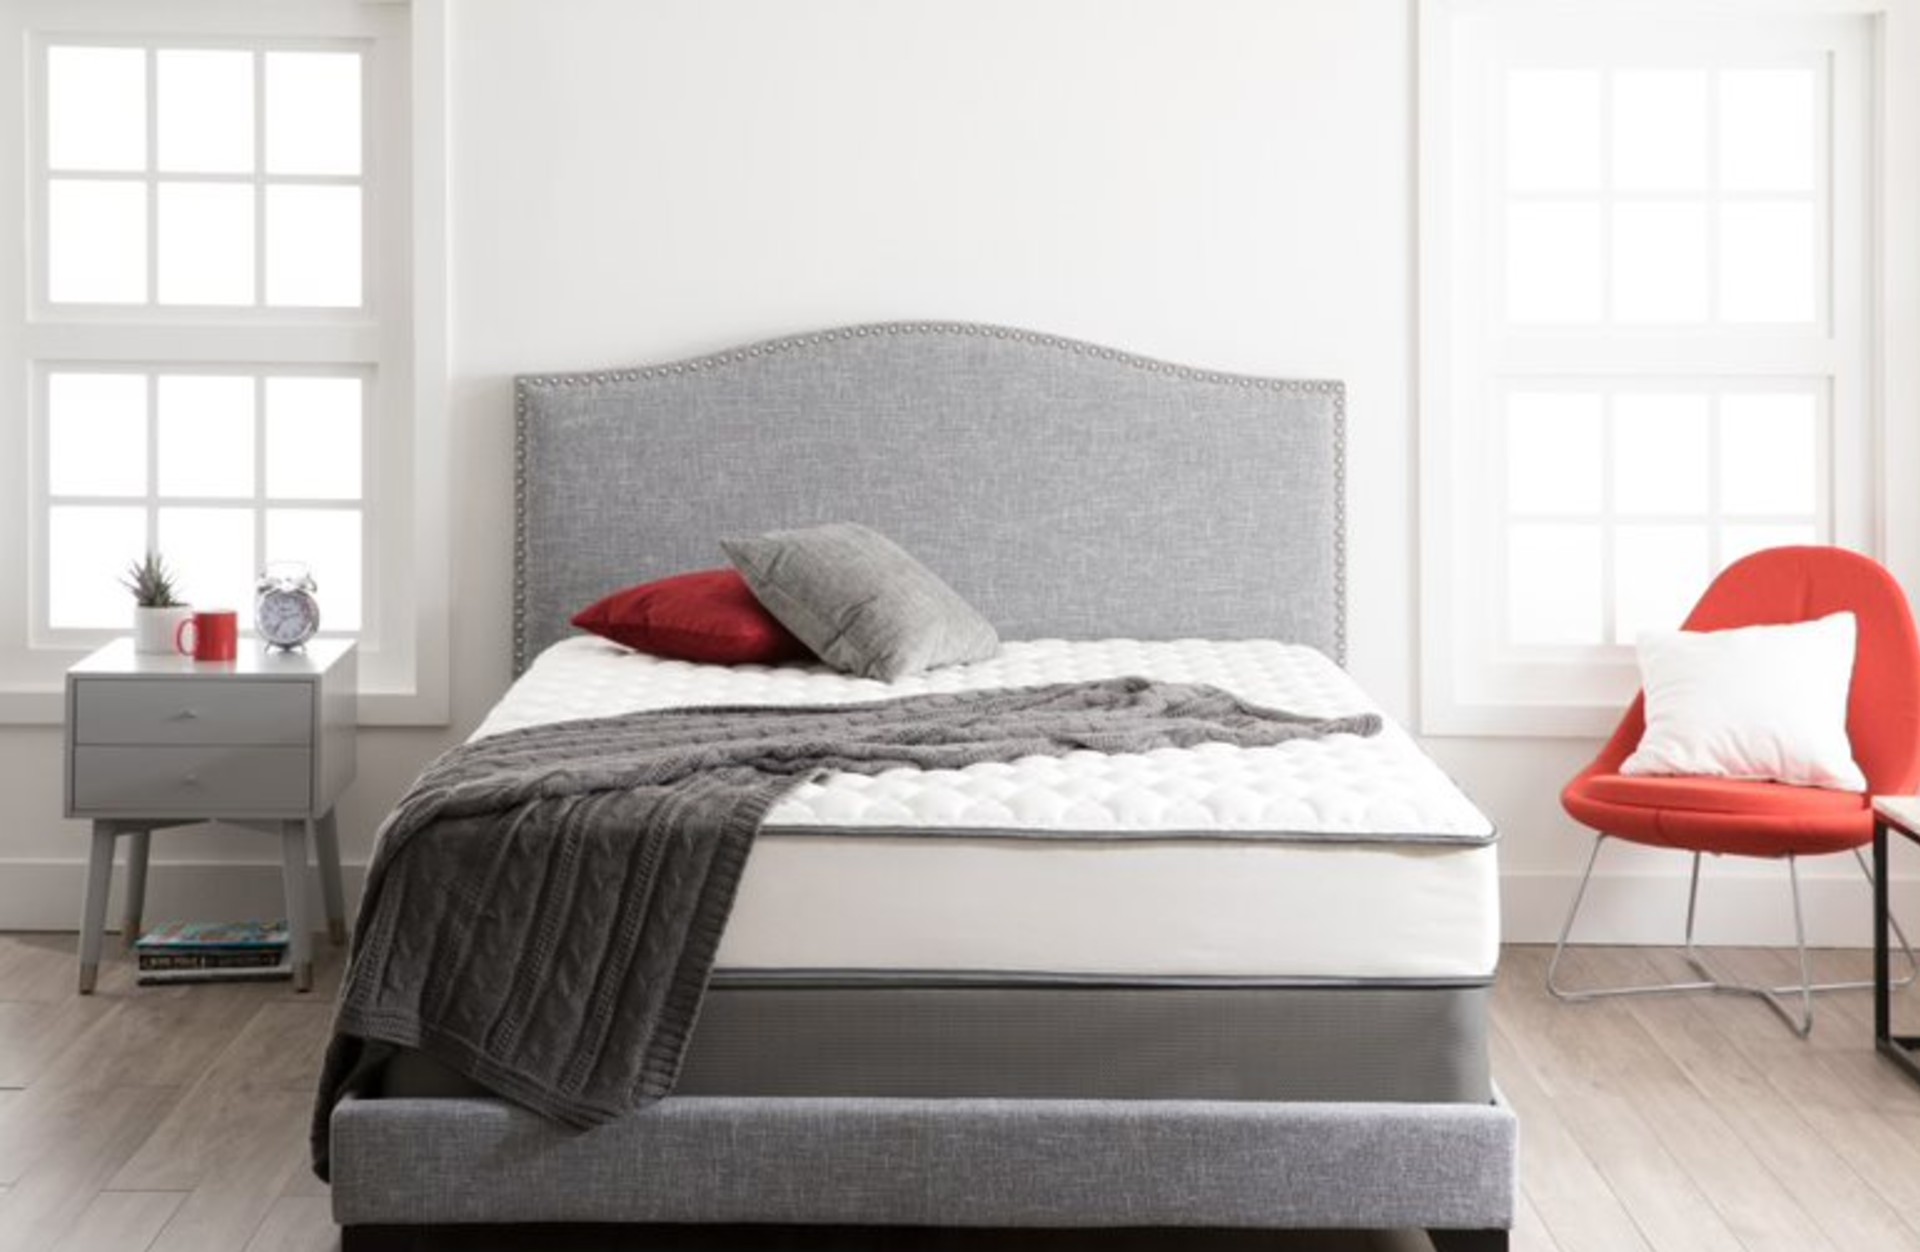 Beautyrest Greenwood now 40% off, starting at $419.99.